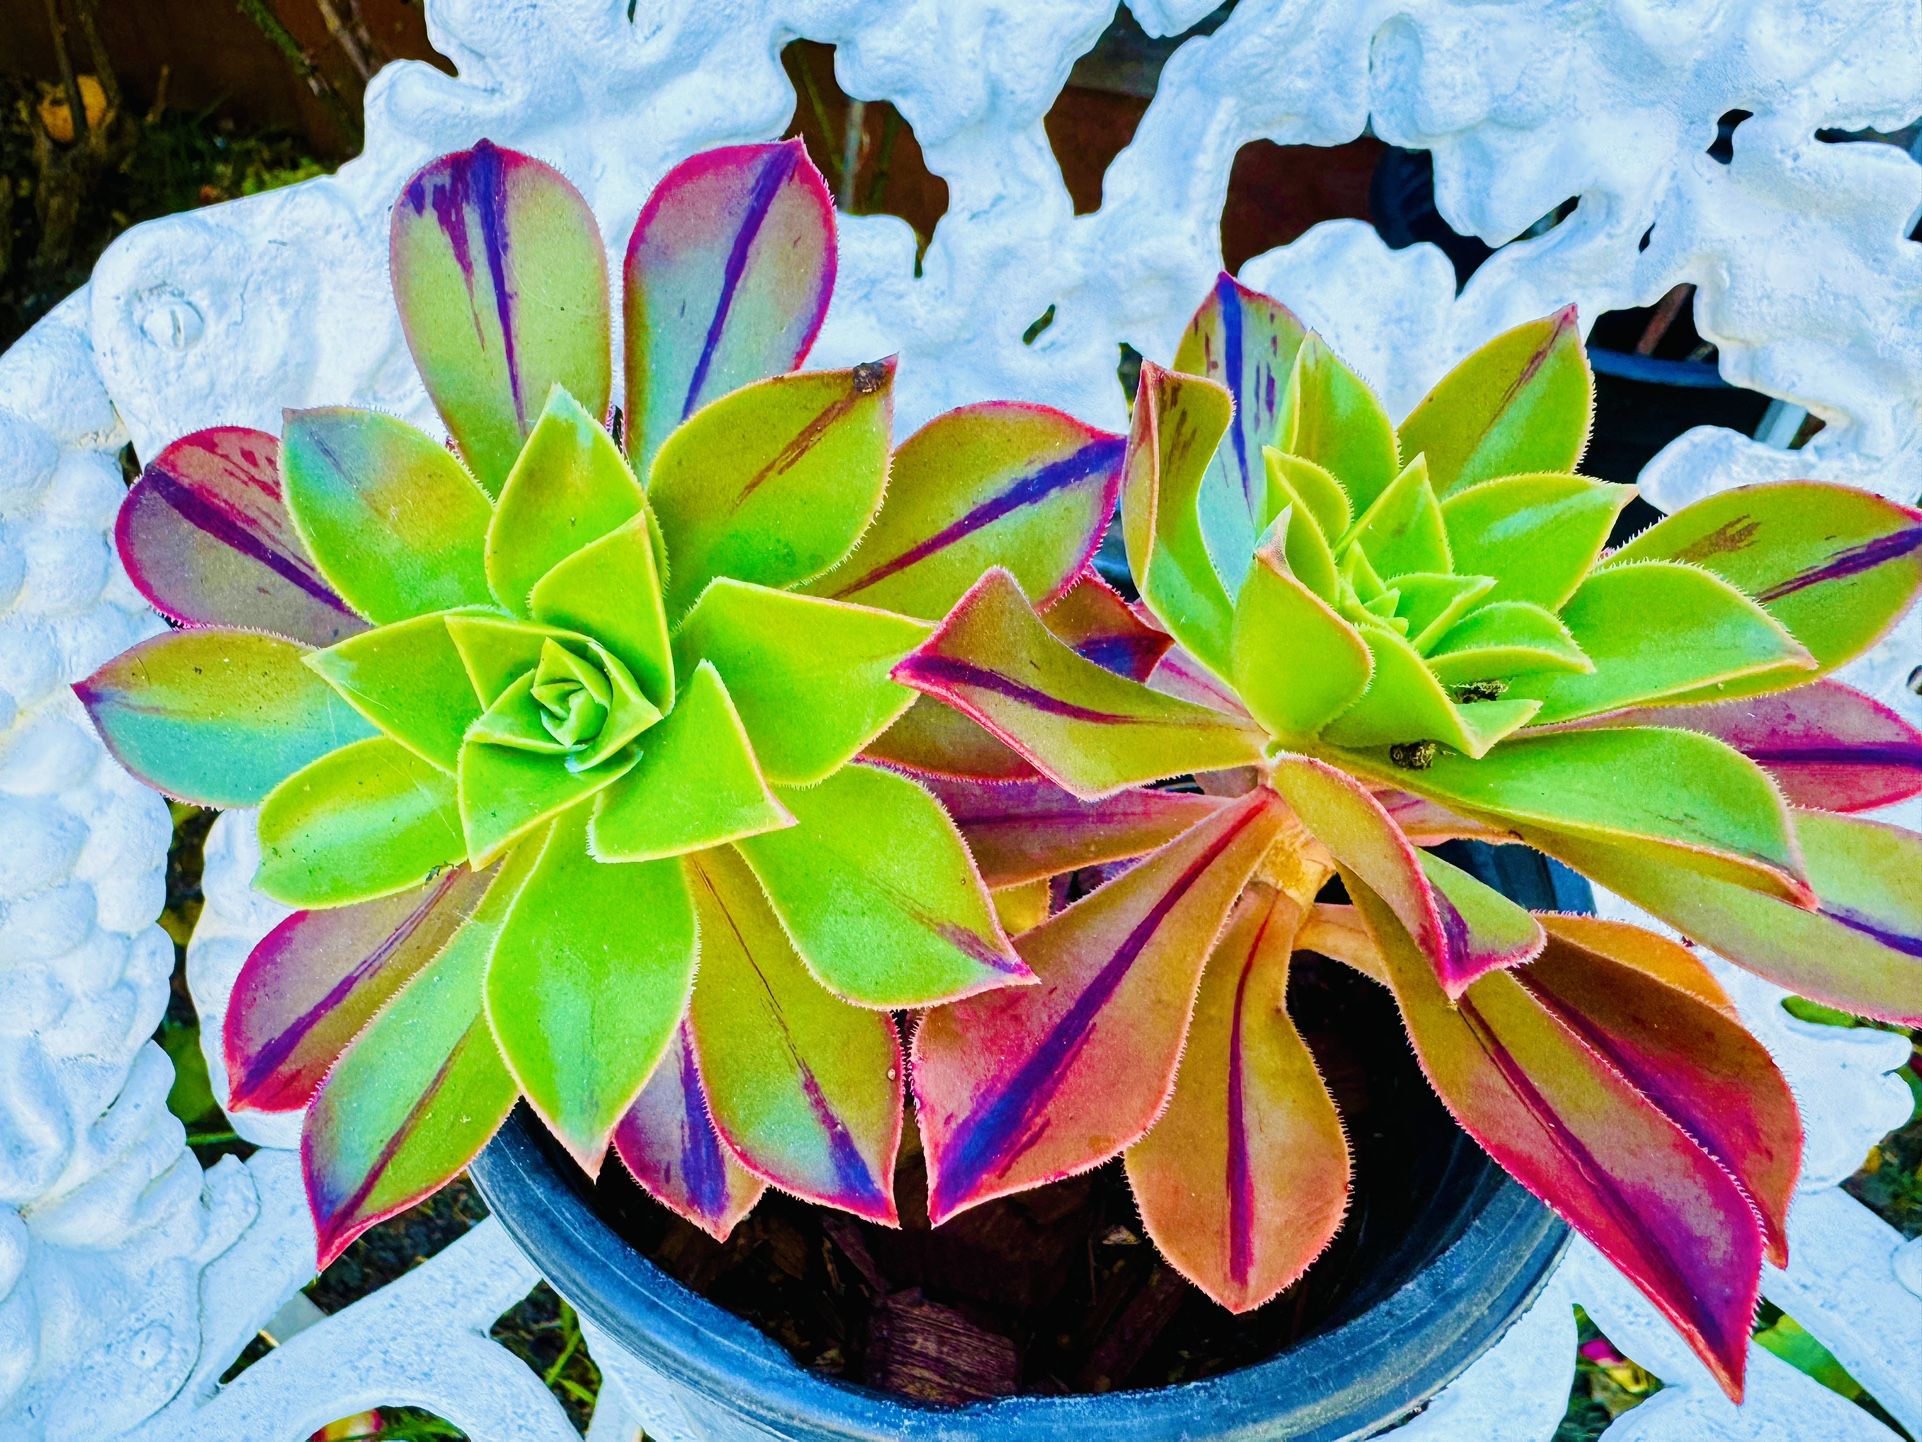 RARE AEONIUM SUCCULENT PLANTS - Easy To Grow and Requires Minimal Water